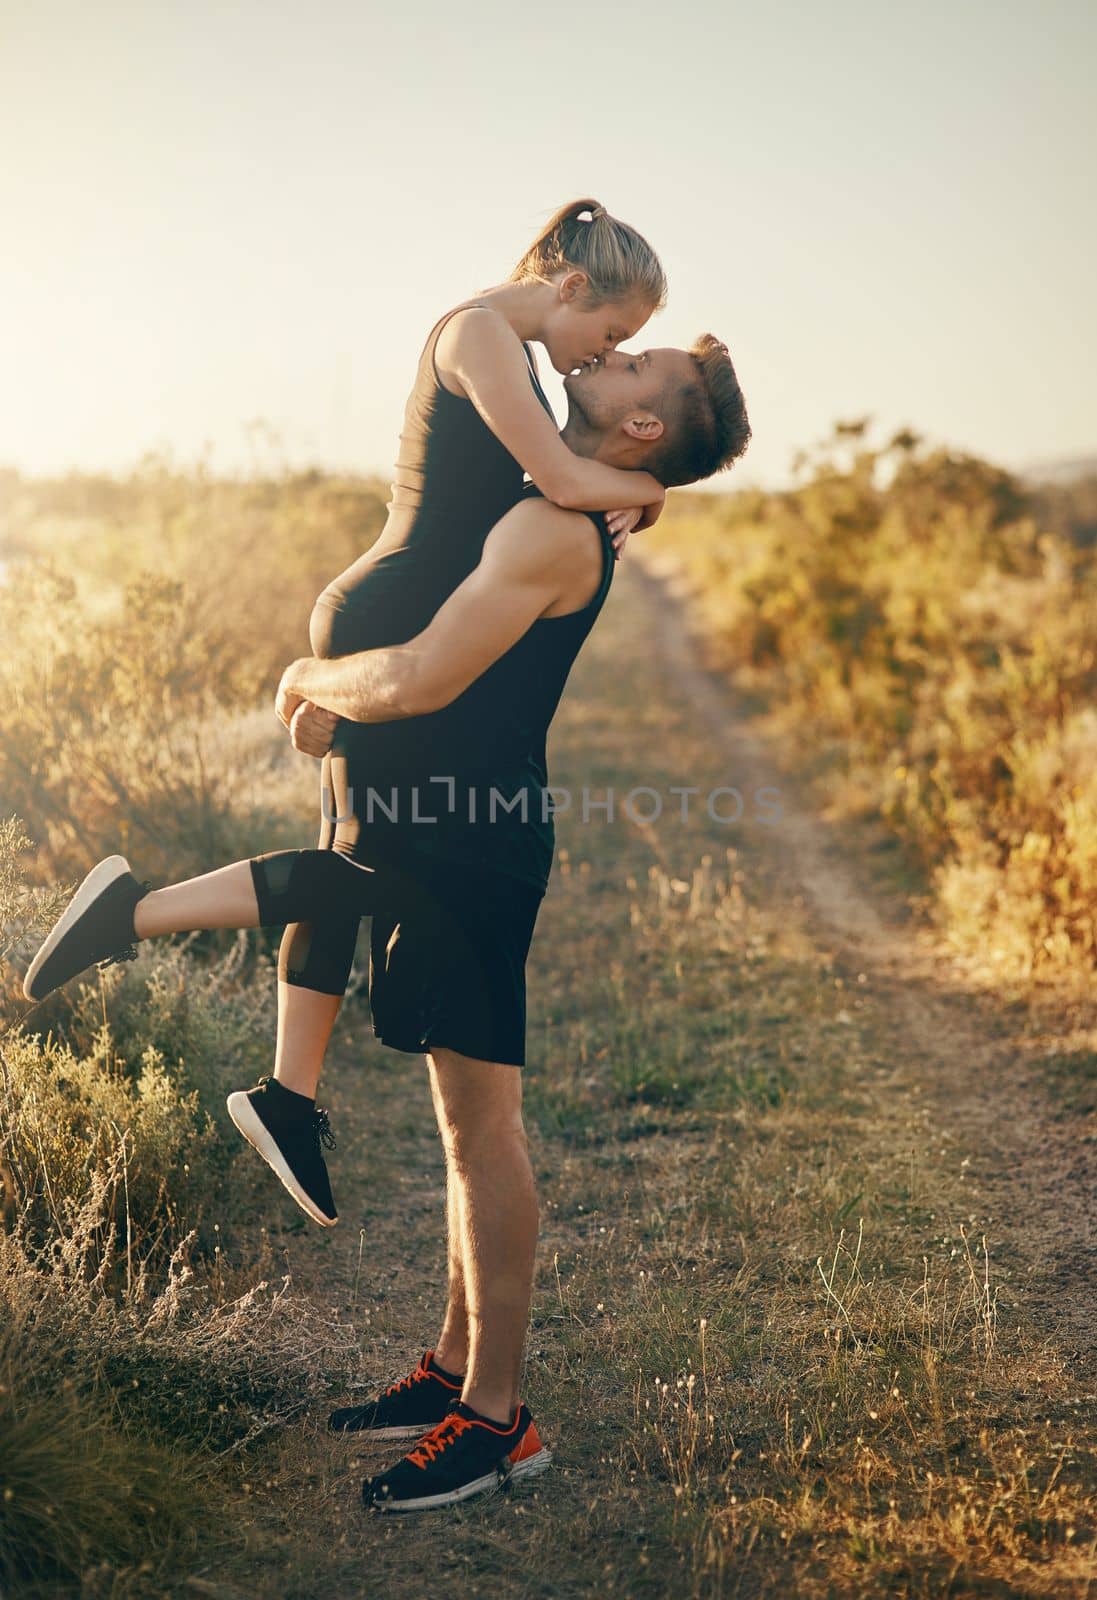 Elevated kisses are the best. a young man kissing his girlfriend while he is lifting her outdoors